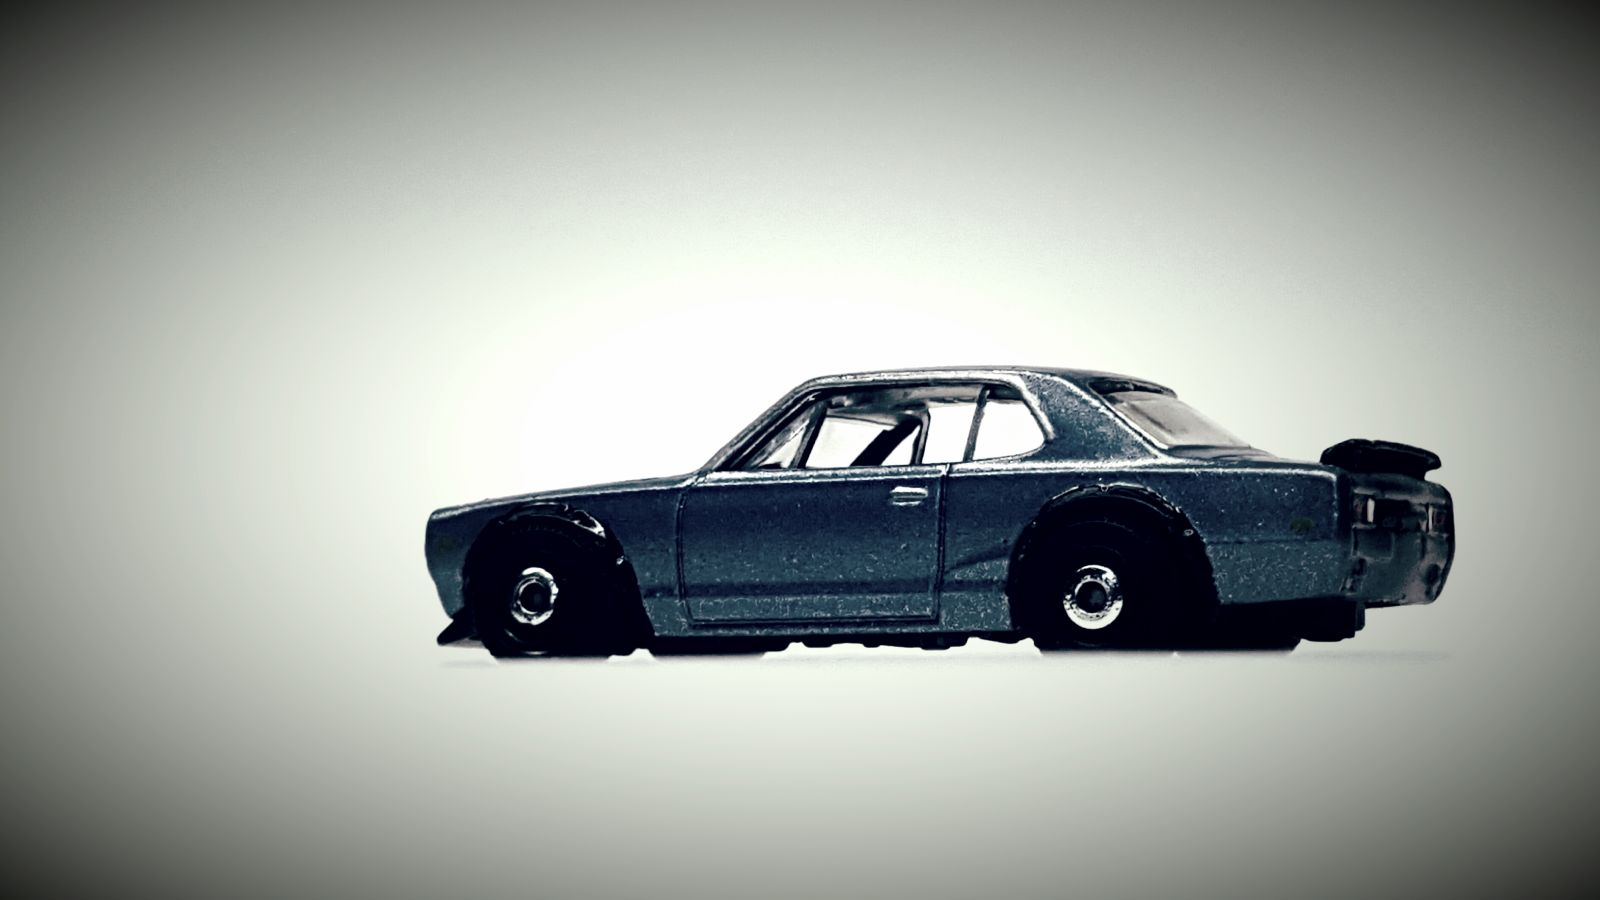 Illustration for article titled Long time, no post. A CUSTOM Skyline 2000 GT-R!!!